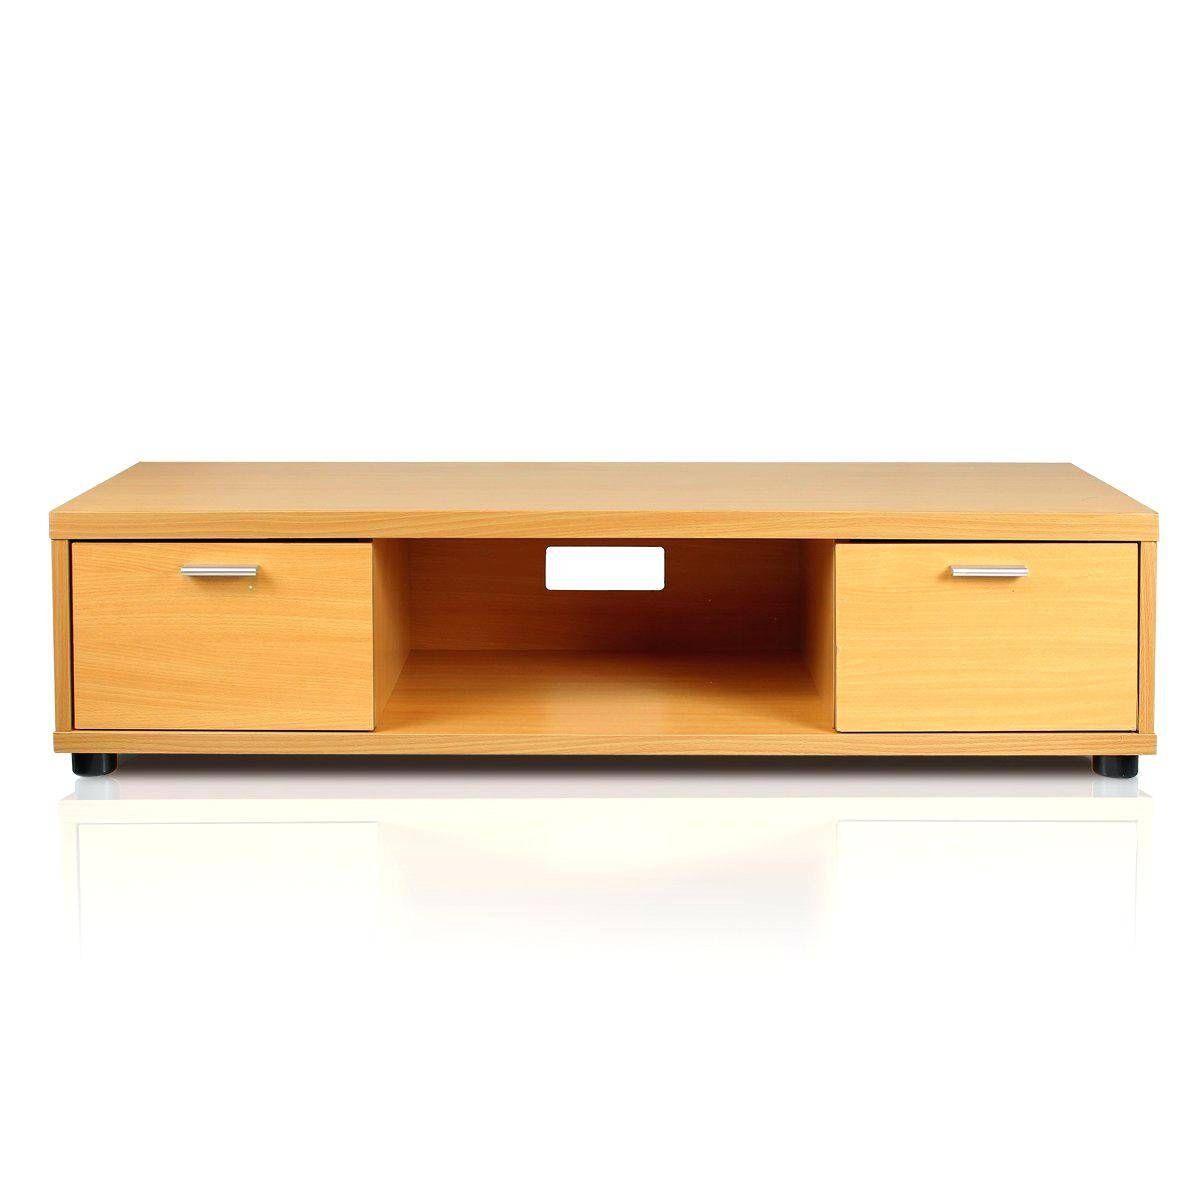 Tv Stand : Charming 32 Tv Stand Design Charming Light Cherry Tv Regarding Light Cherry Tv Stands (View 15 of 15)